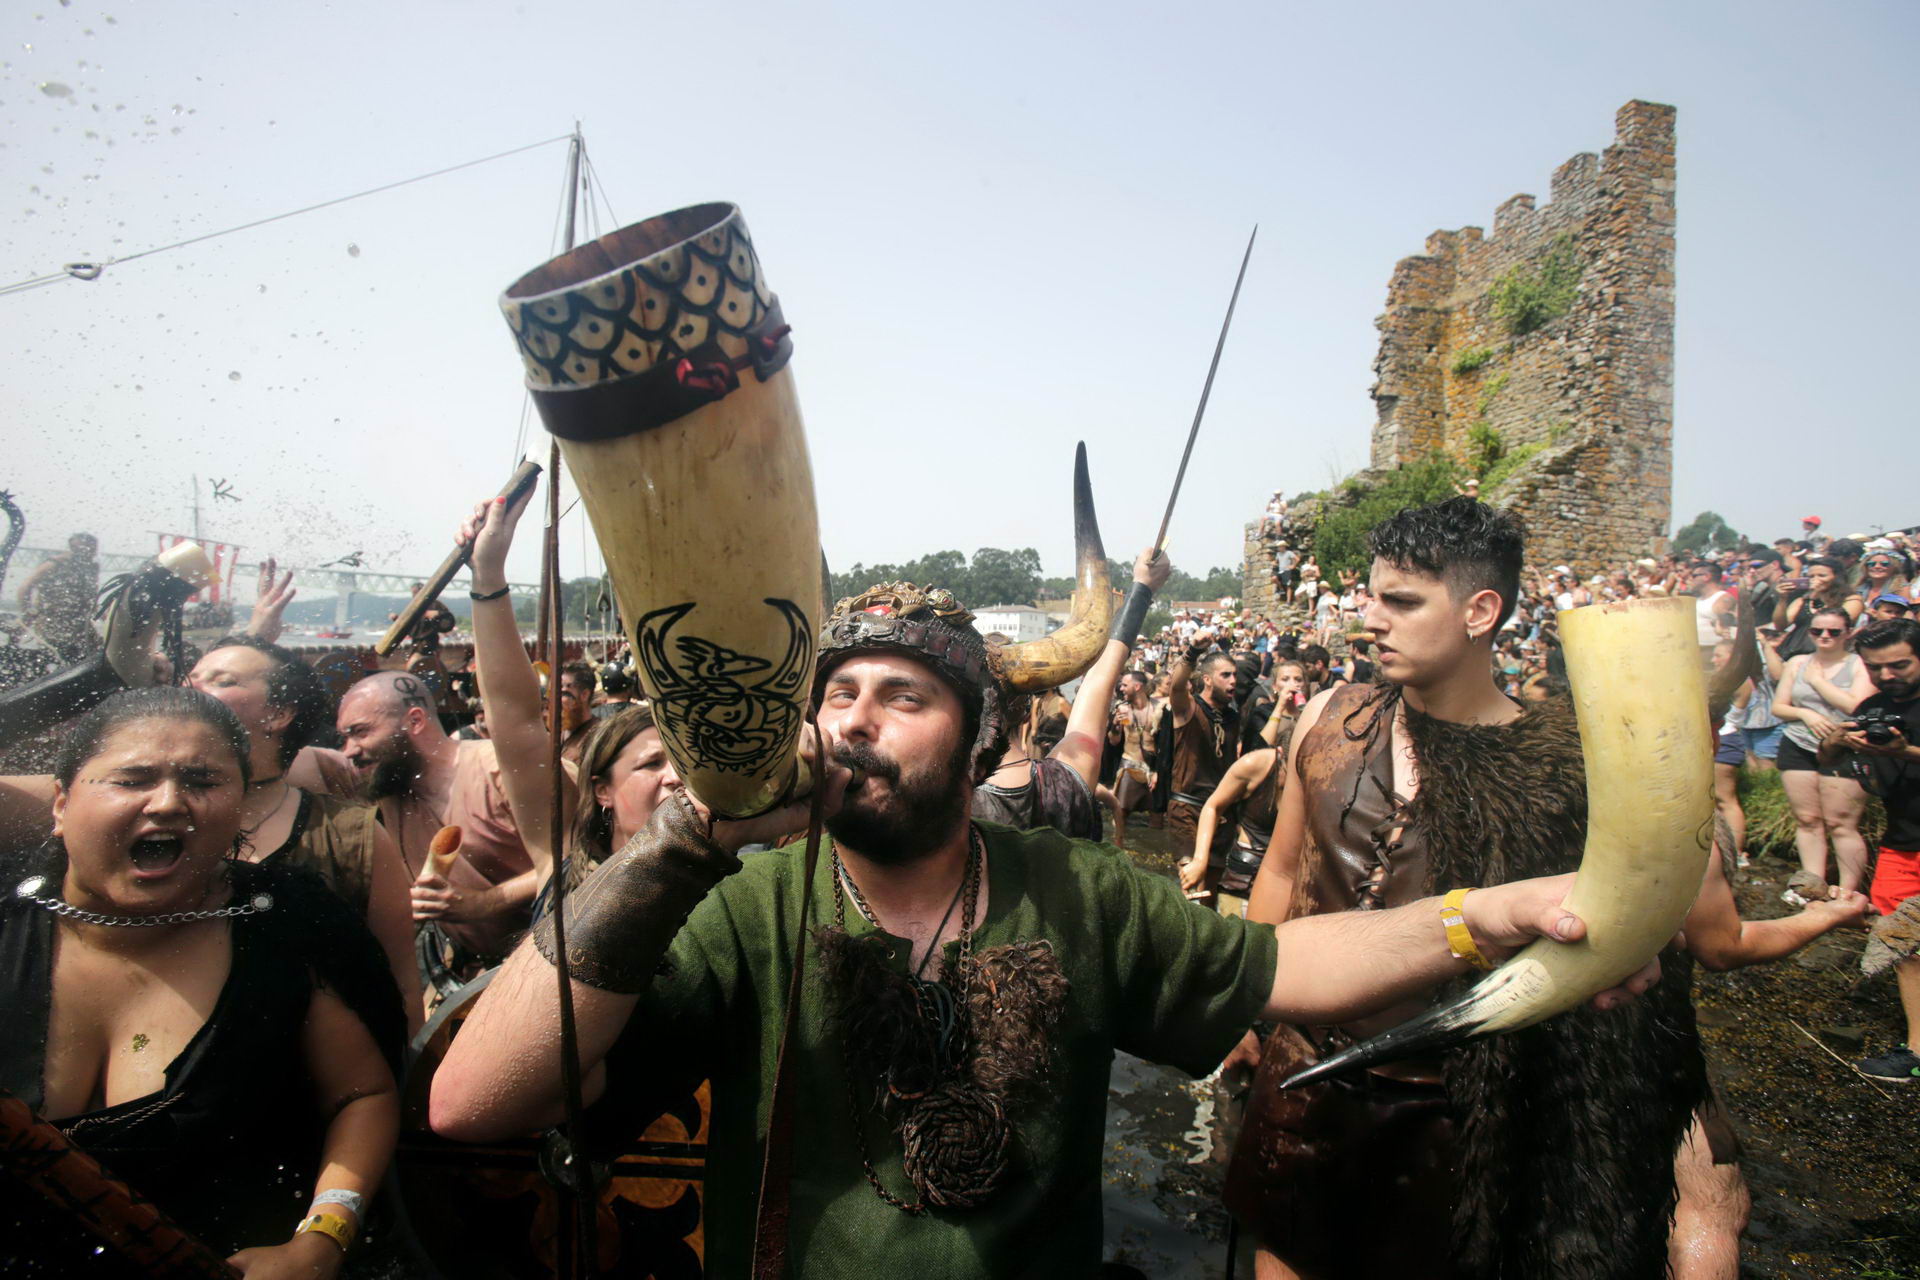 Photos From The 2018 Viking Festival In Spain